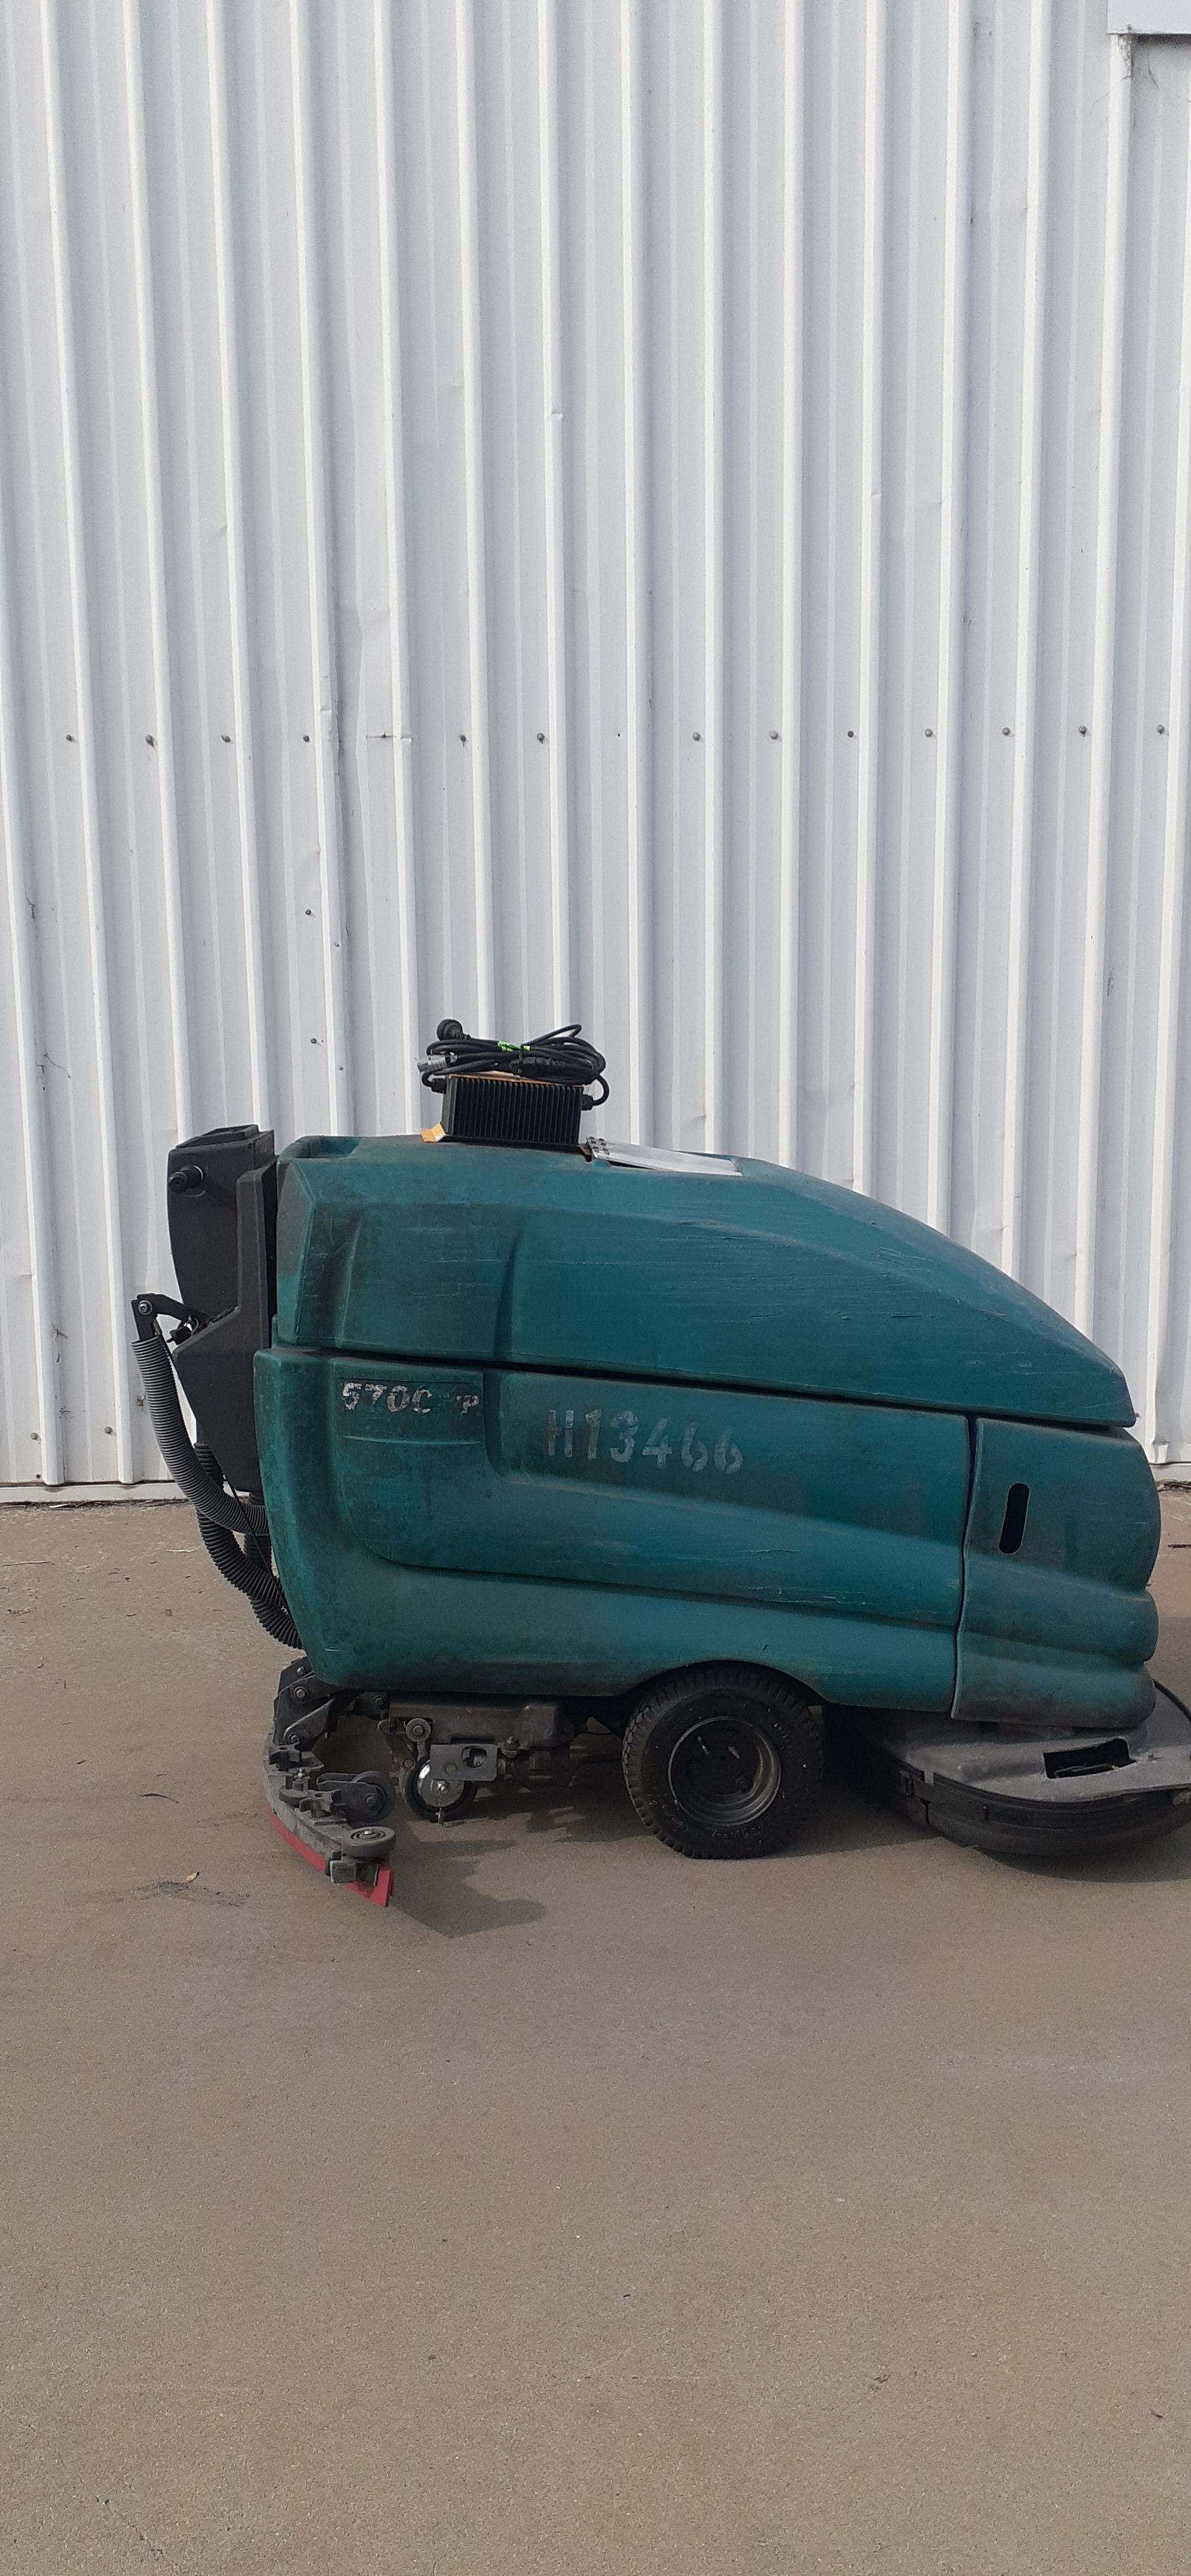 Used forklift: TENNANT 5700XP 